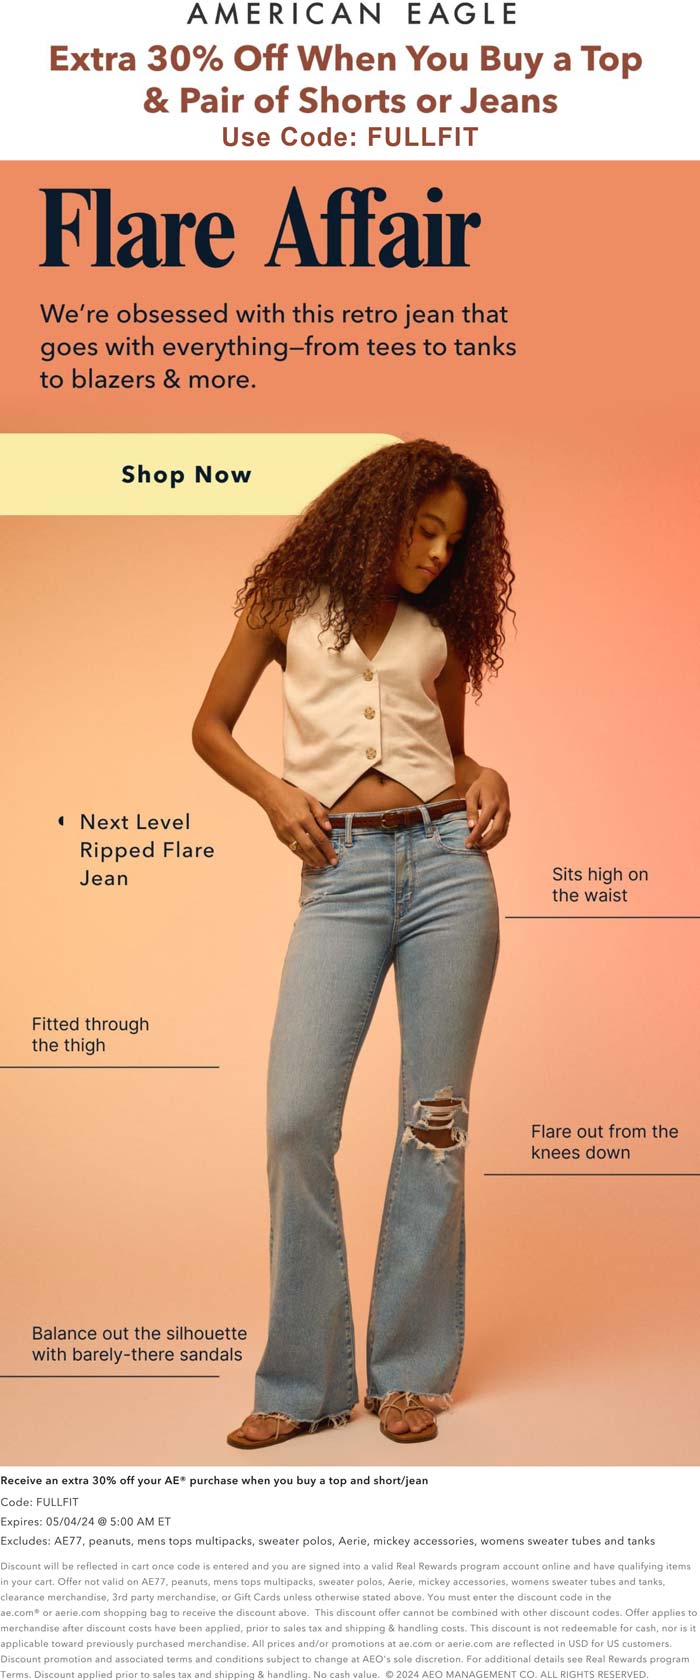 American Eagle stores Coupon  Extra 30% off today at American Eagle via promo code FULLFIT #americaneagle 